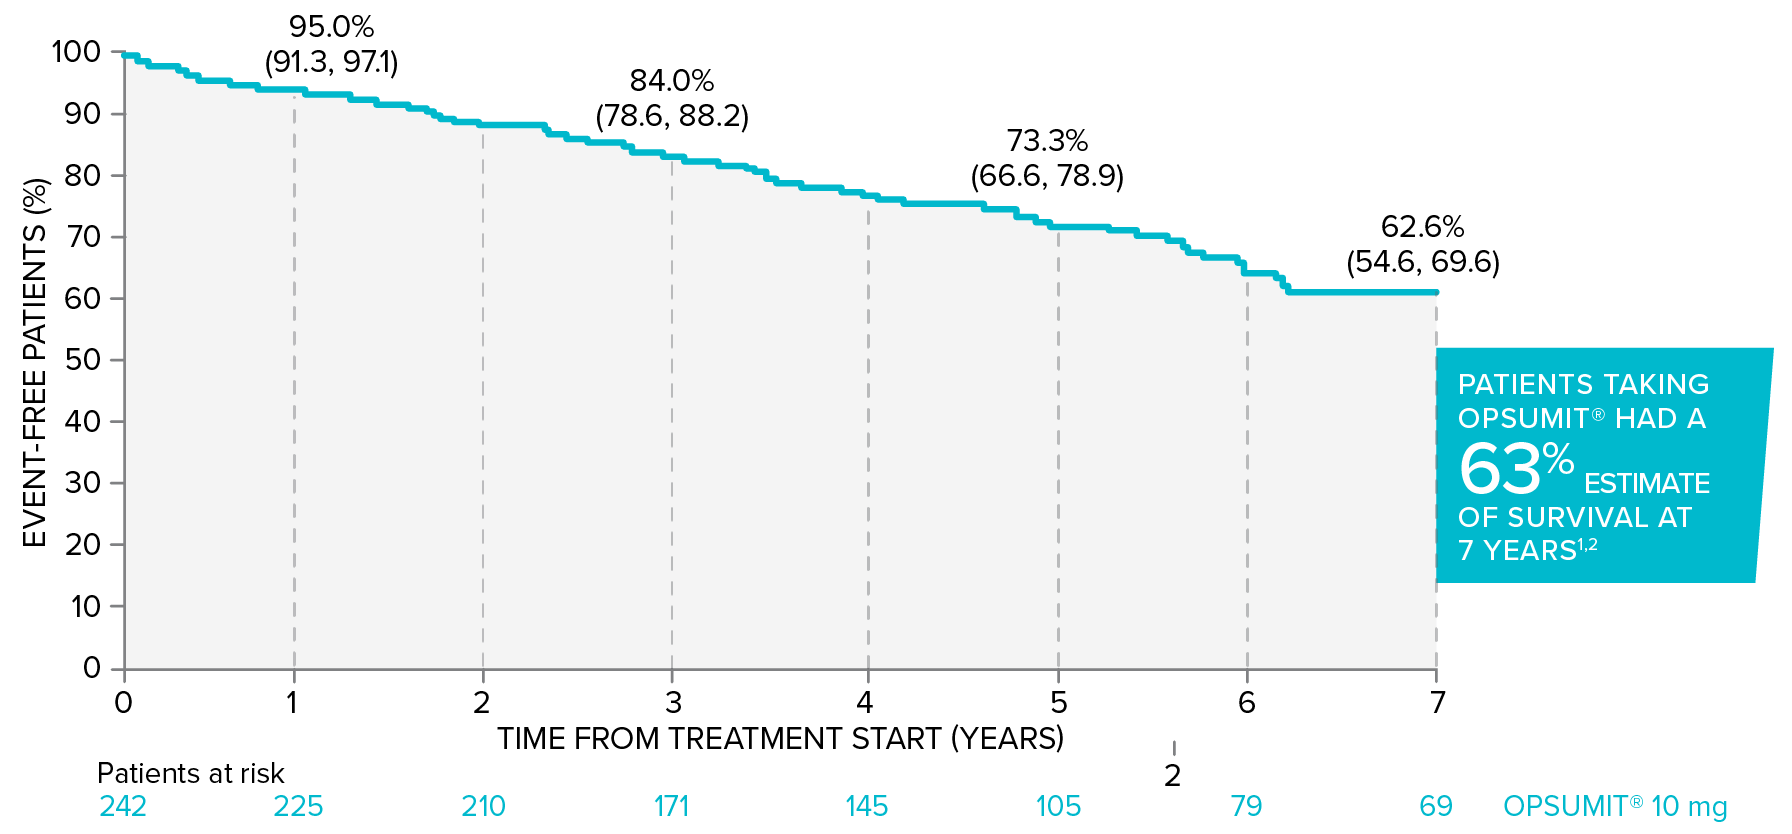 Additional analyses: 7-year overall survival data